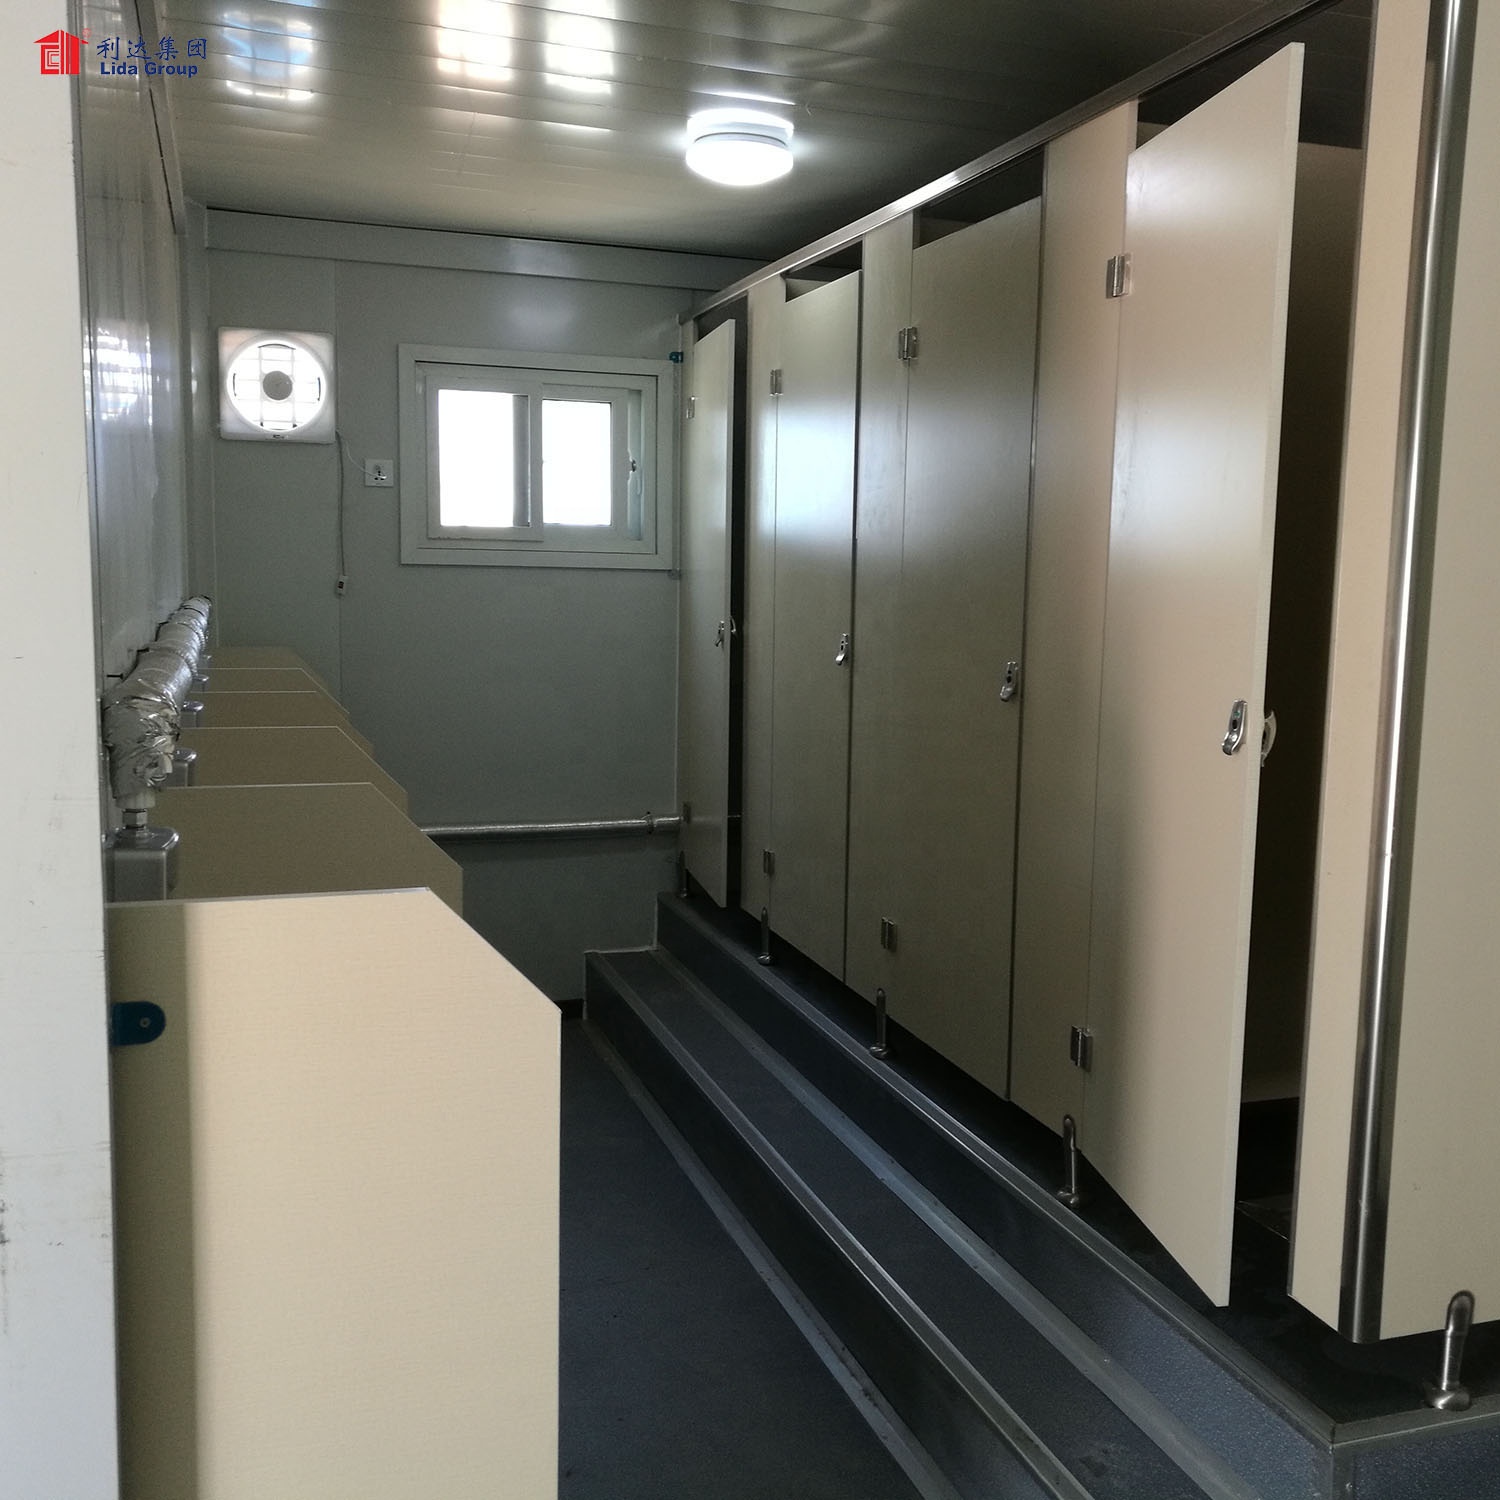 Egypt Low Cost Prefabricated House Design 40ft Flat Pack Container